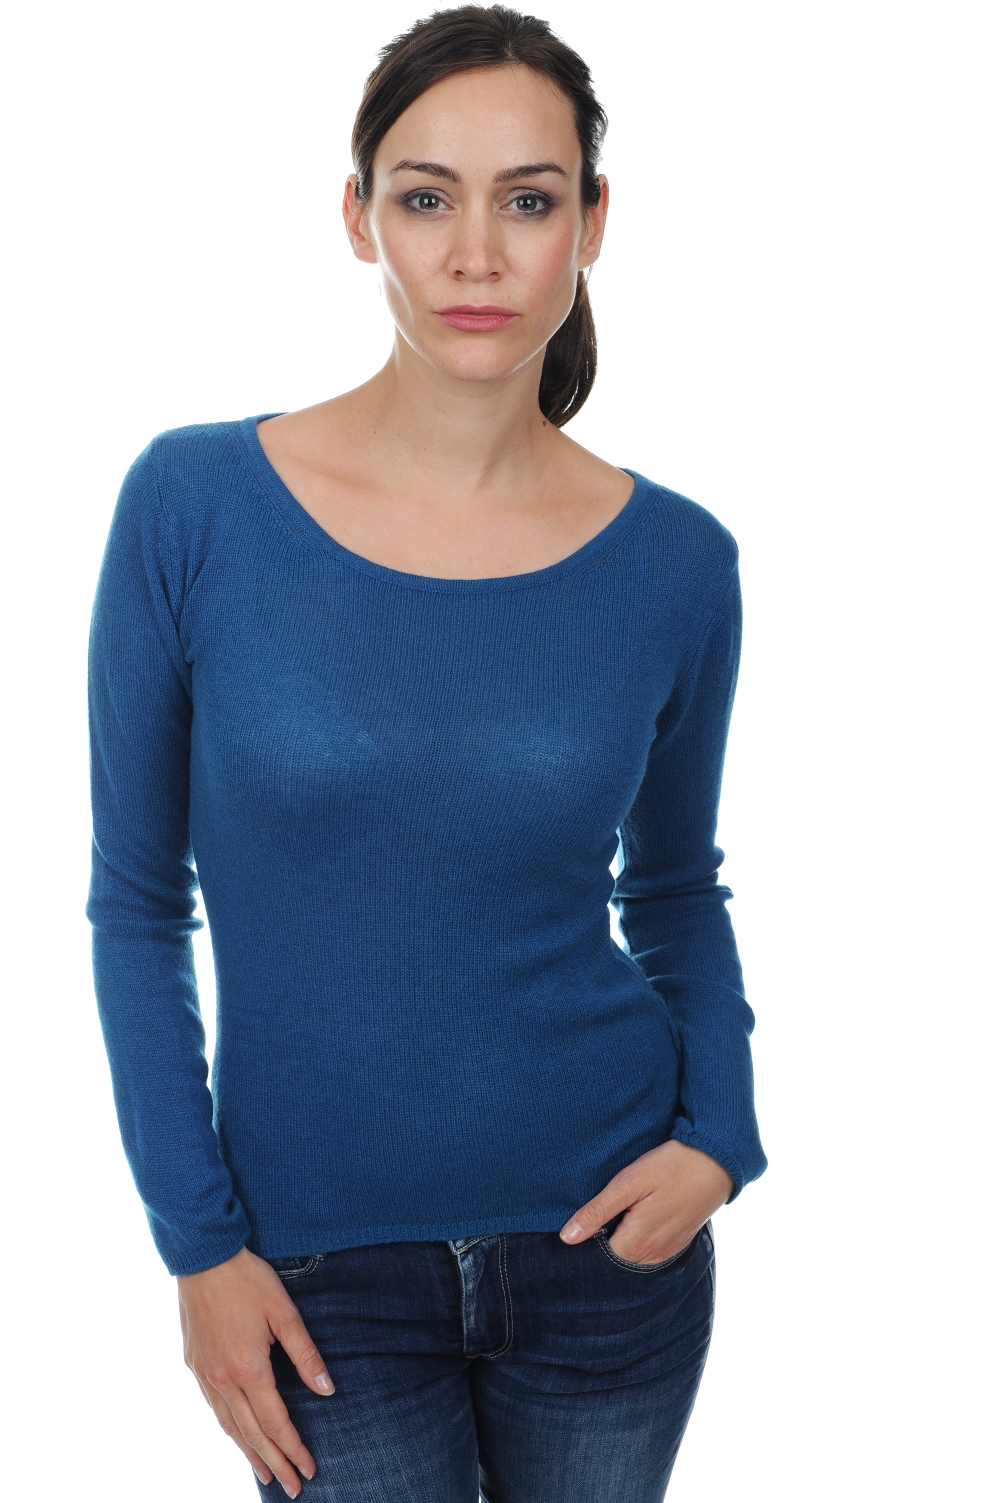 Cashmere ladies basic sweaters at low prices caleen canard blue l